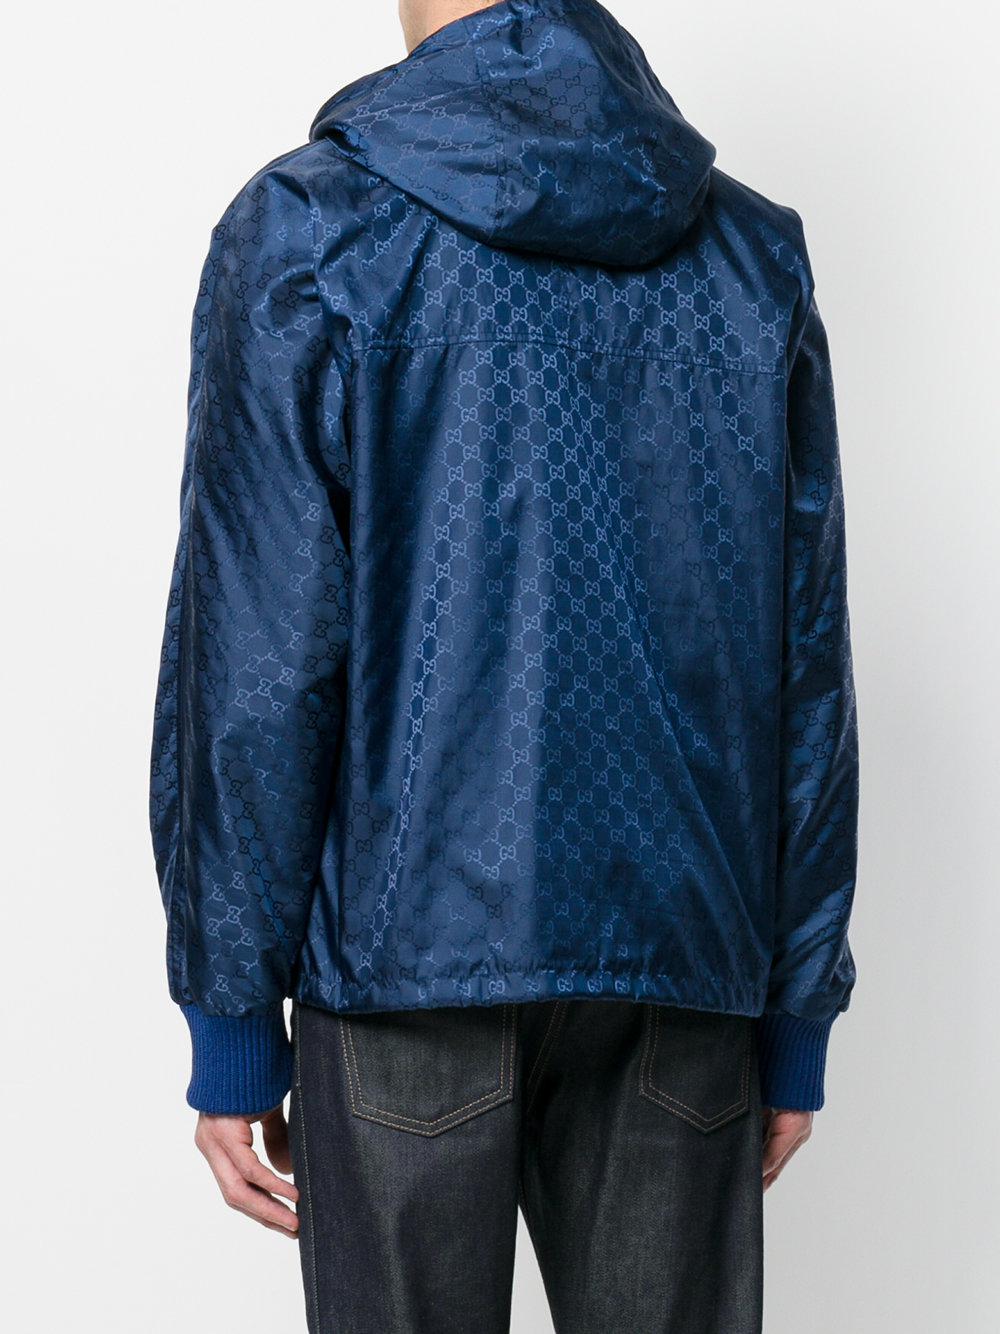 Gucci Wool Monogram Shell Jacket in Blue for Men - Lyst